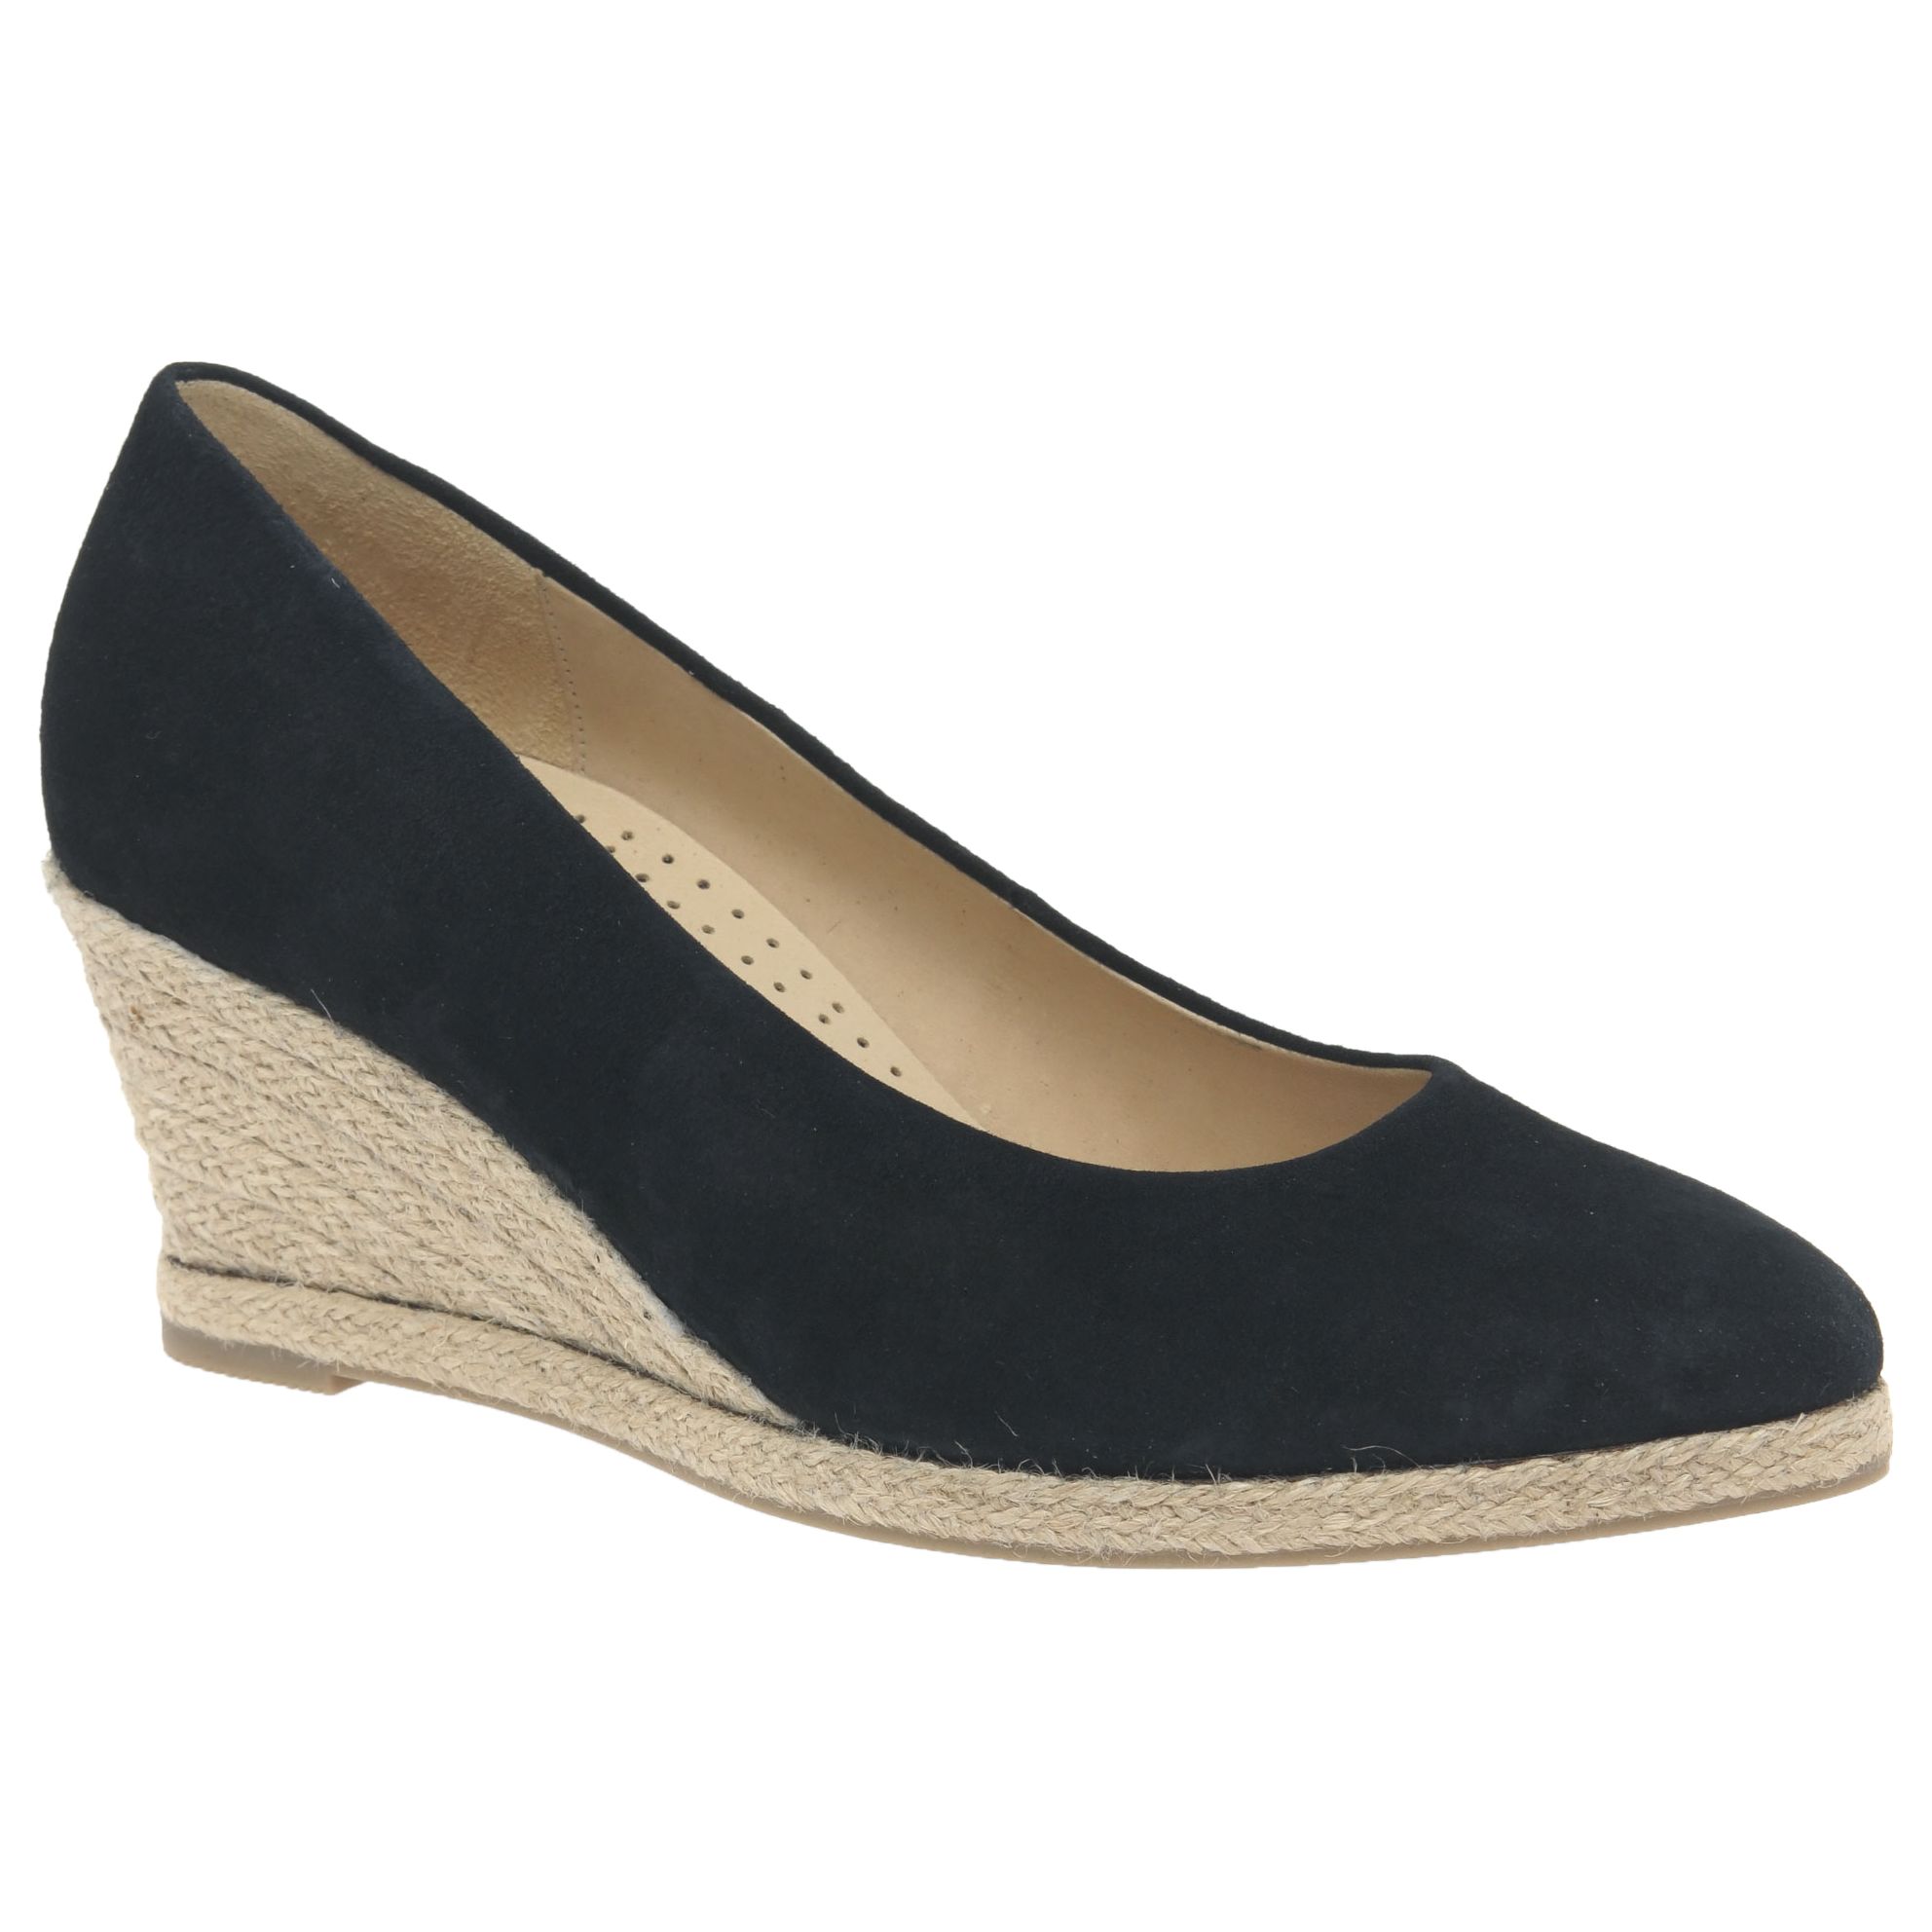 Gabor Paisley Wedge Heeled Court Shoes, Pacific at John Lewis & Partners